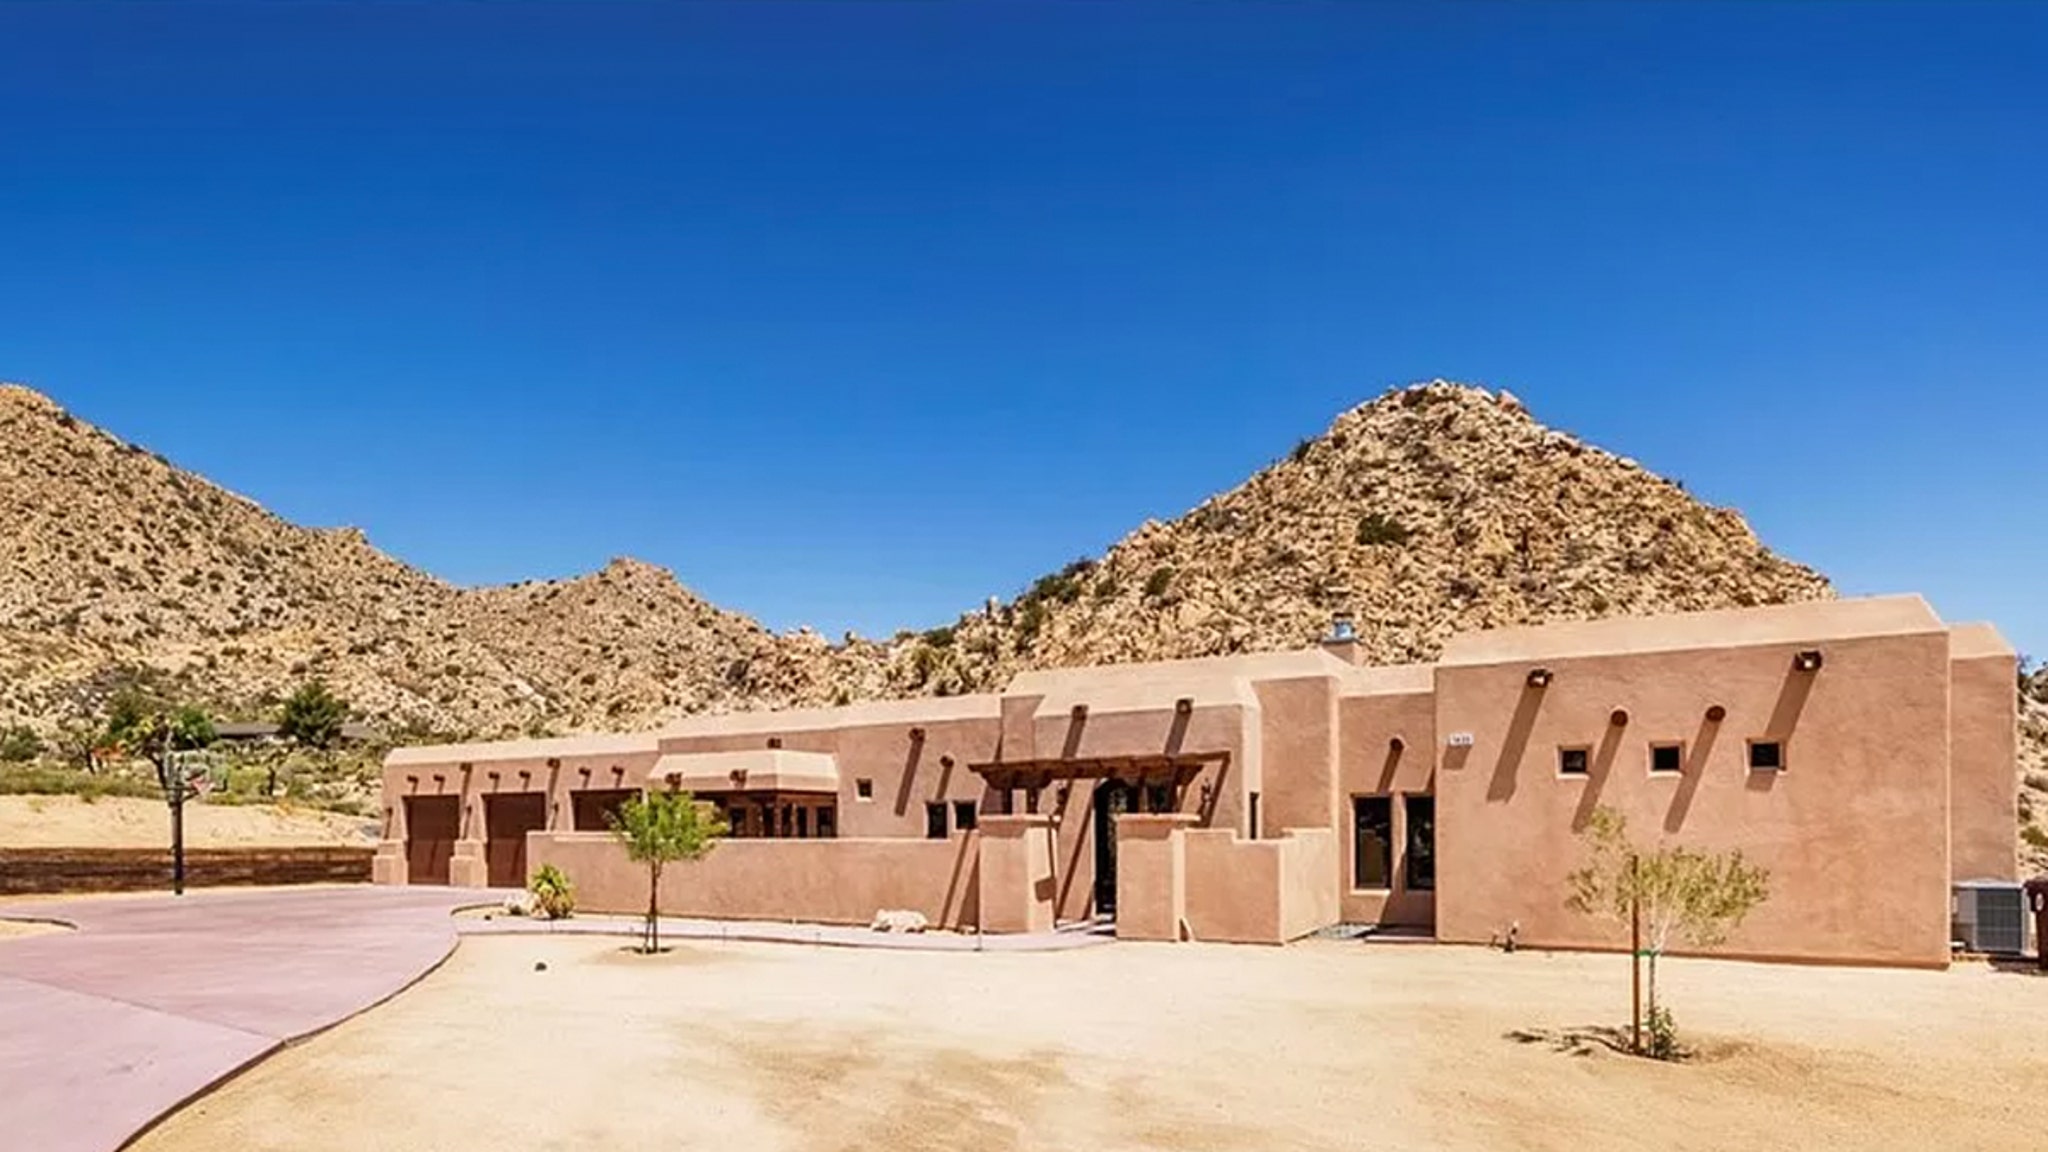 Amber Heard Sells Yucca Valley Home for Over a Million, Major Profit